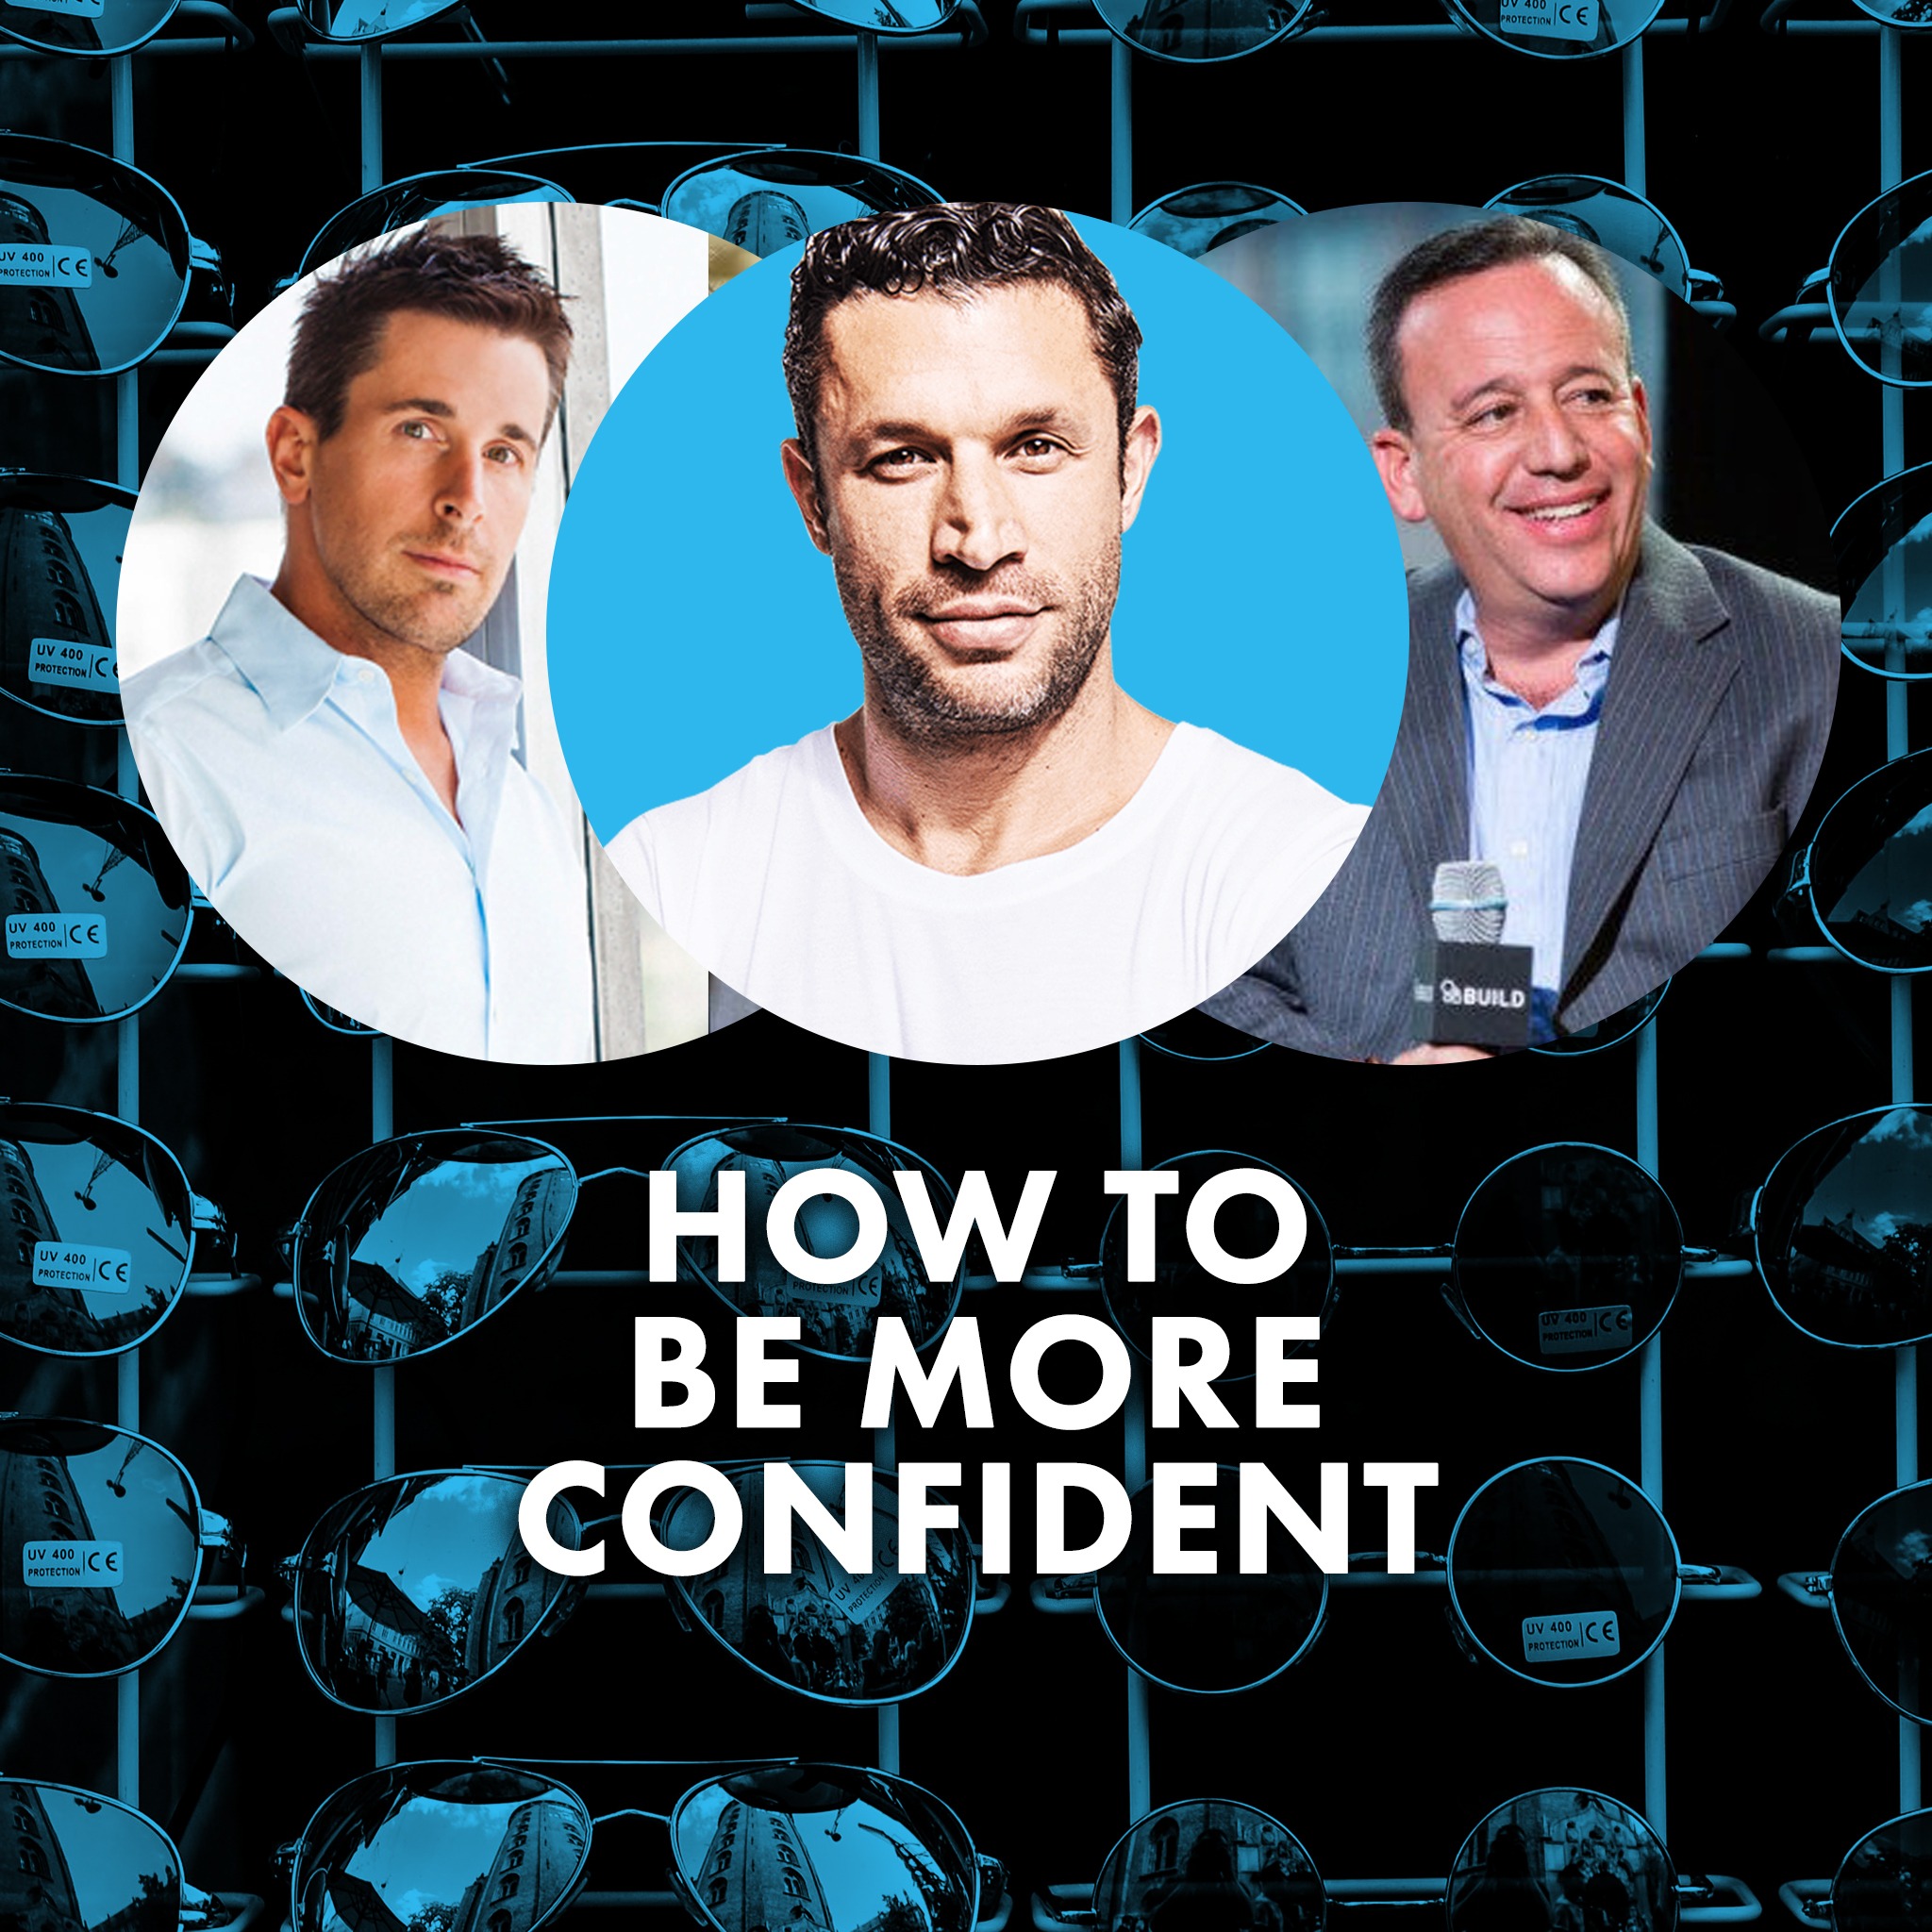 Three Ways to Be More Confident